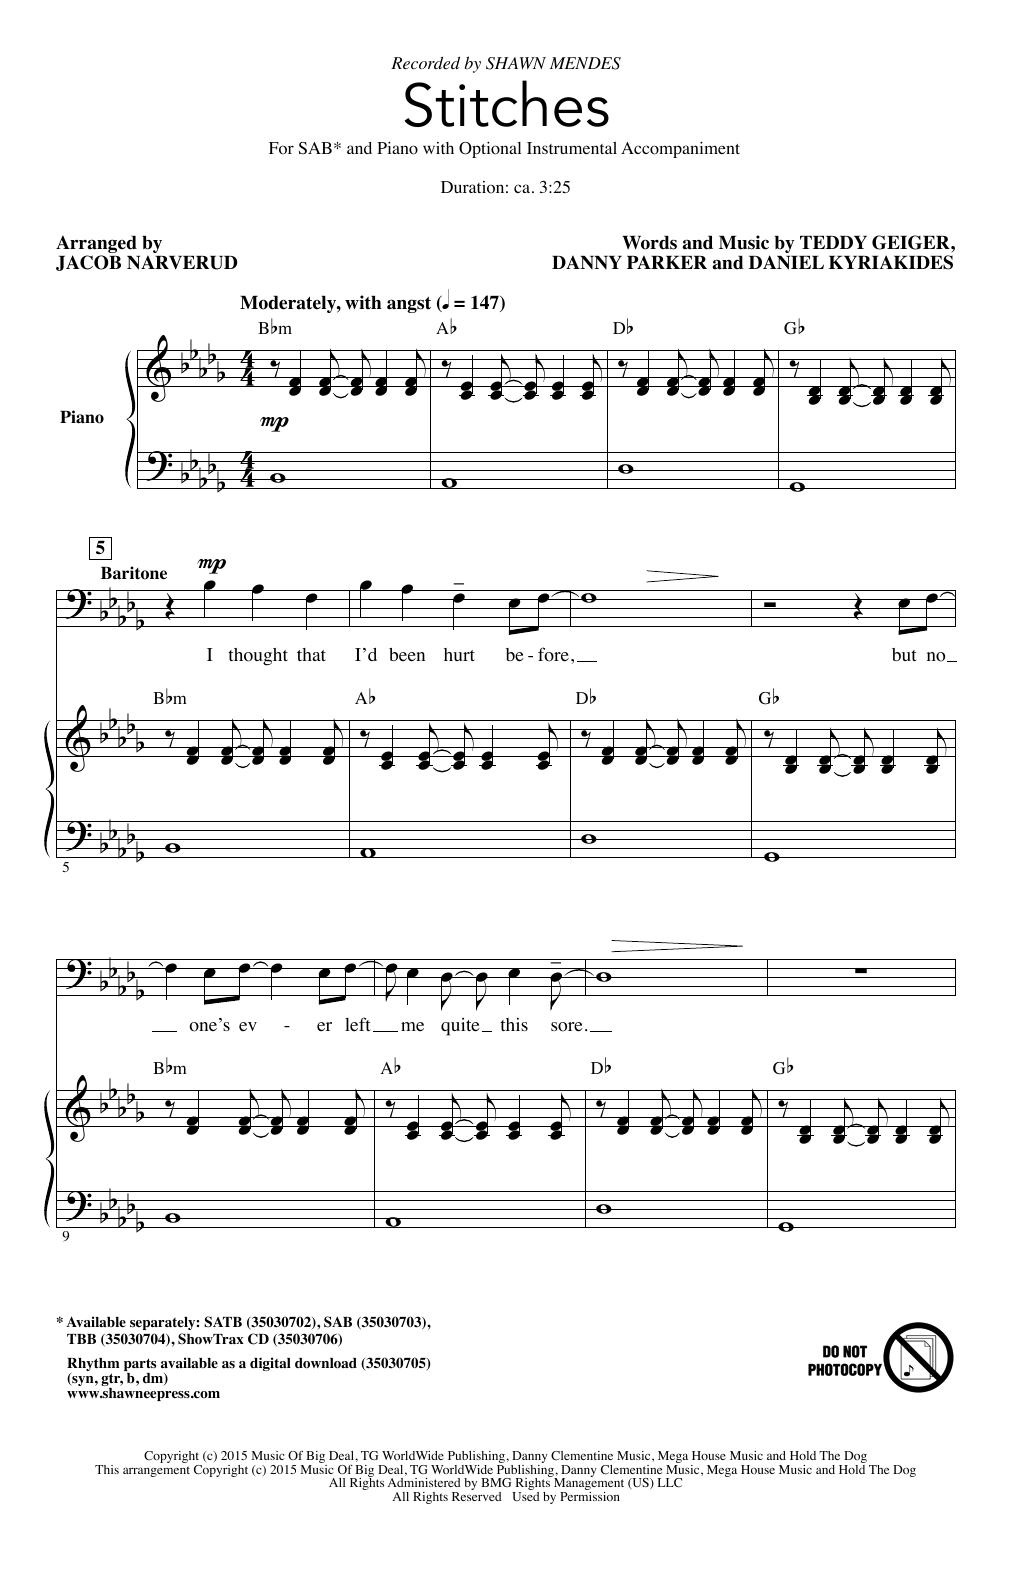 Download Shawn Mendes Stitches (arr. Jacob Narverud) Sheet Music